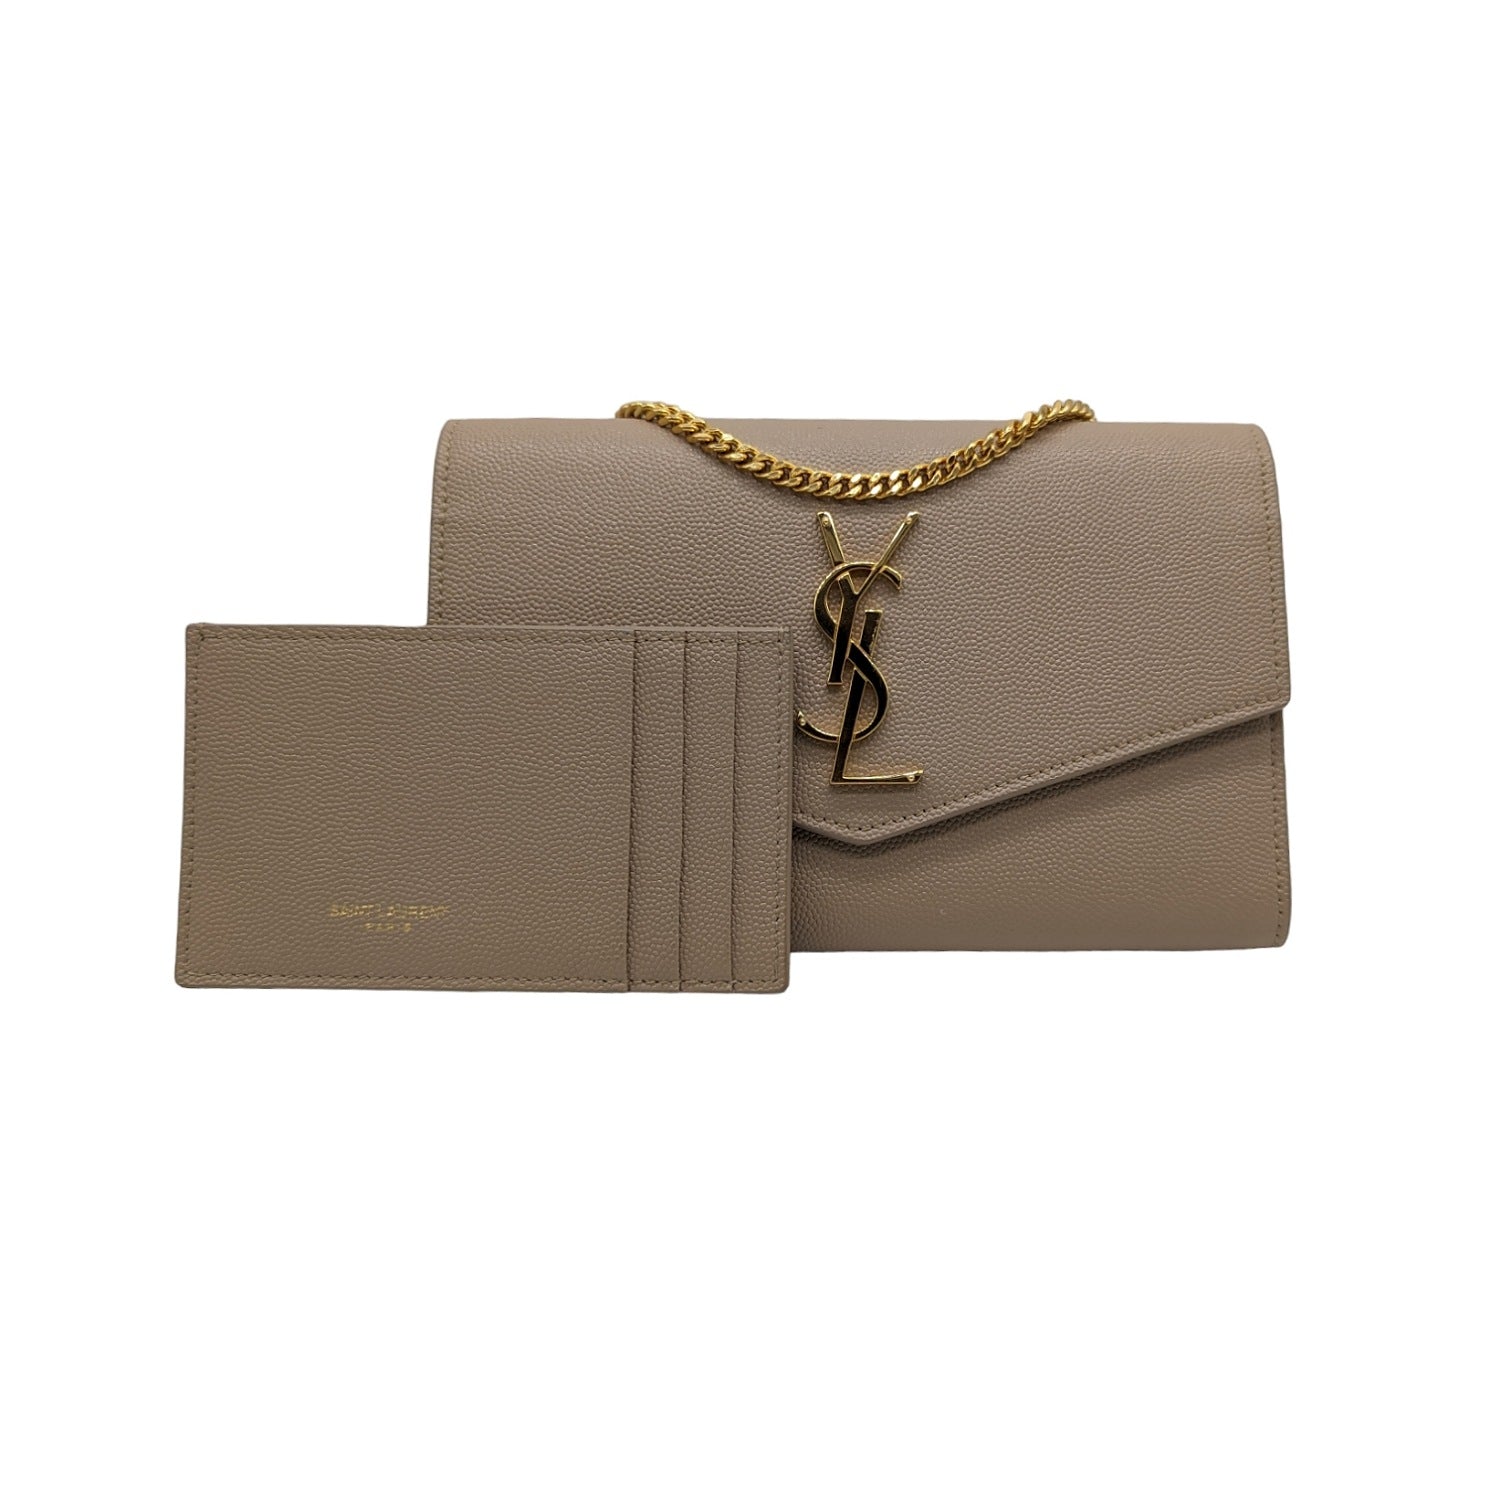 Saint Laurent, Bags, Ysl Authentic Evening Clutch Beige With Gold  Hardware Wallet On Chain